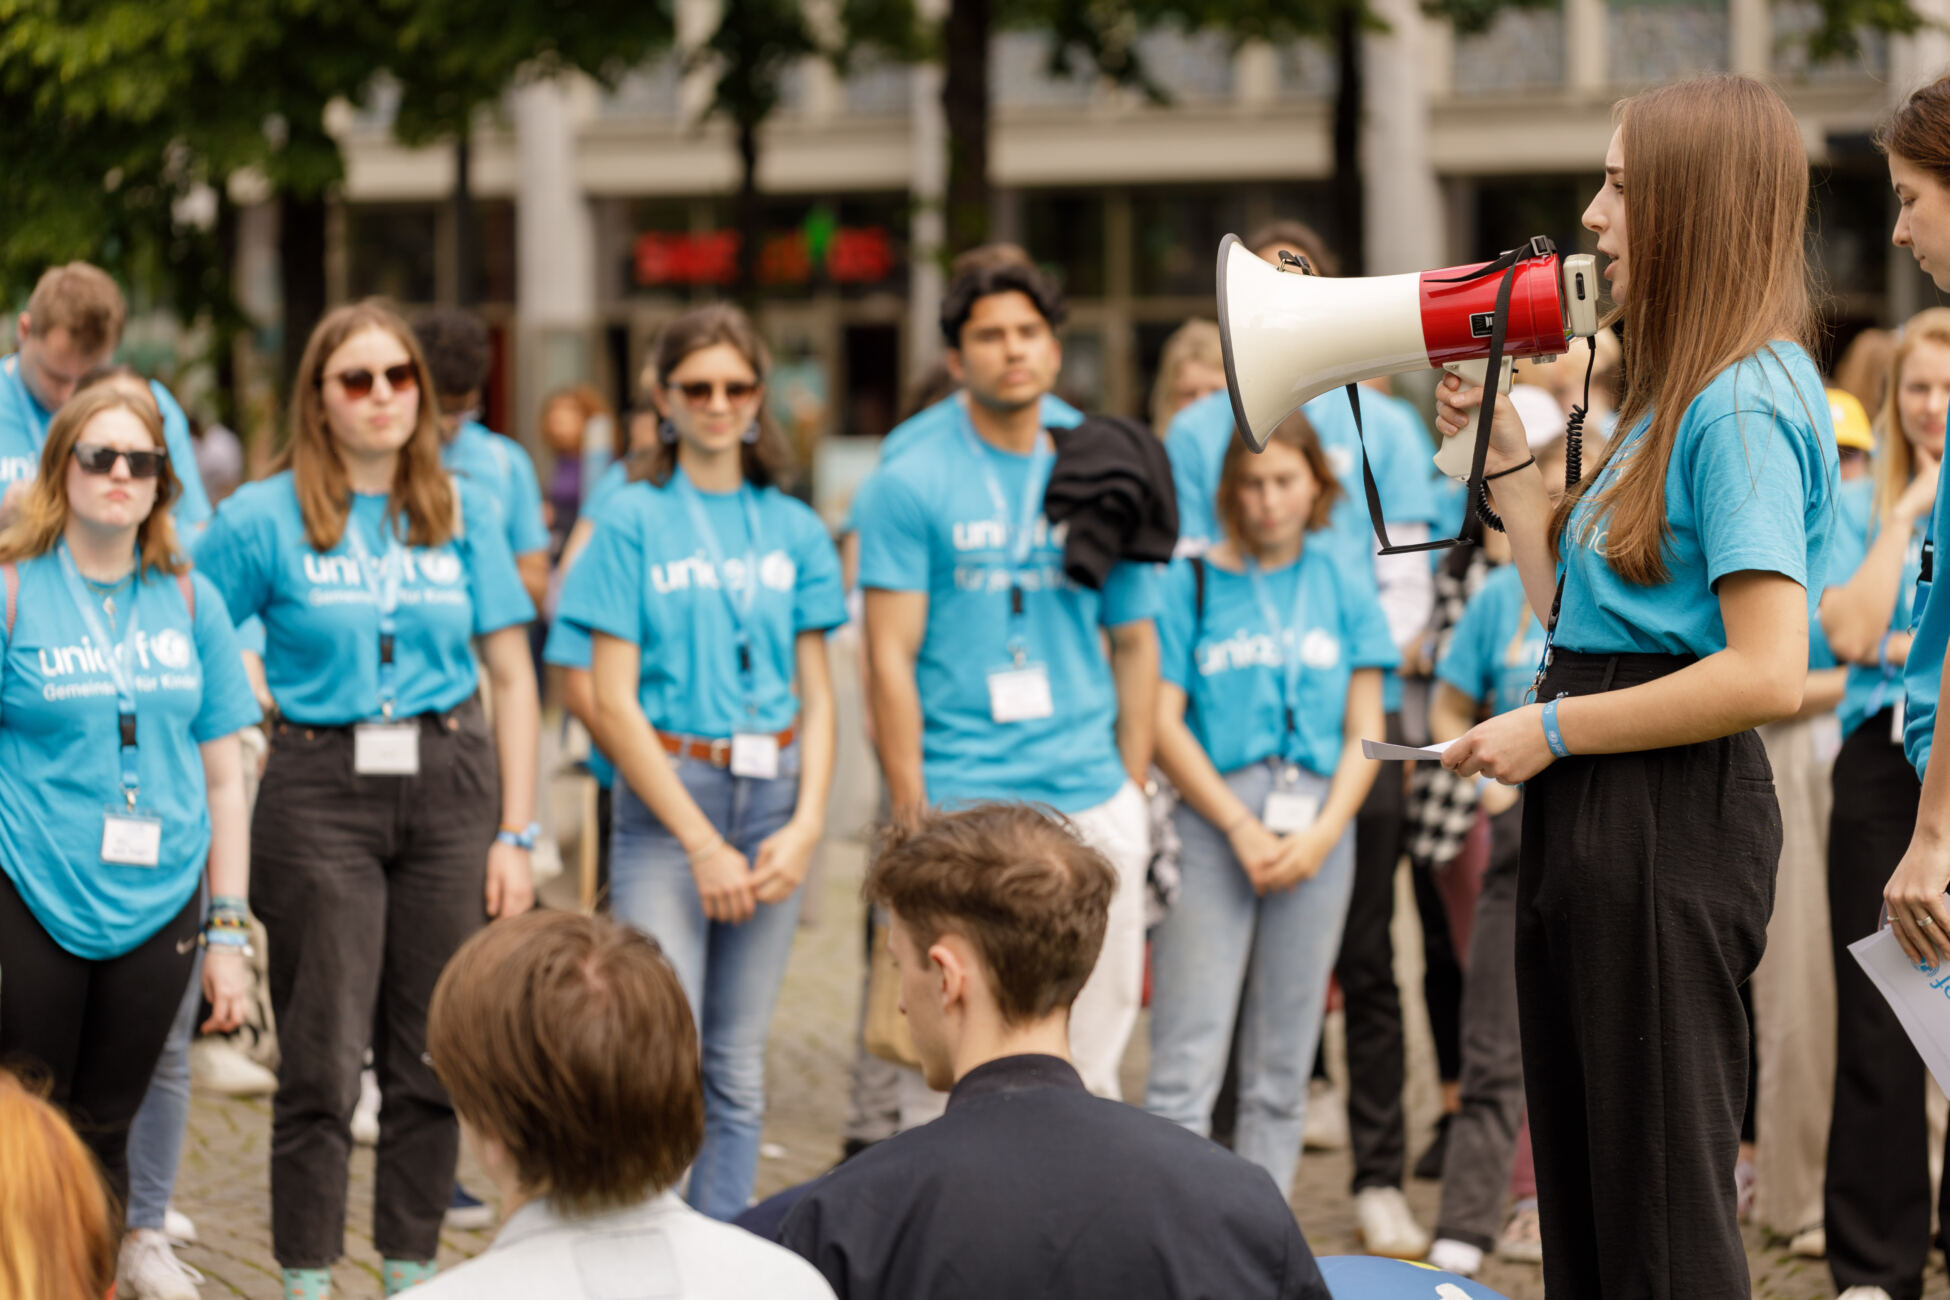 Students at a Germany university wearing UNICEF t-shirts take part in a group activity